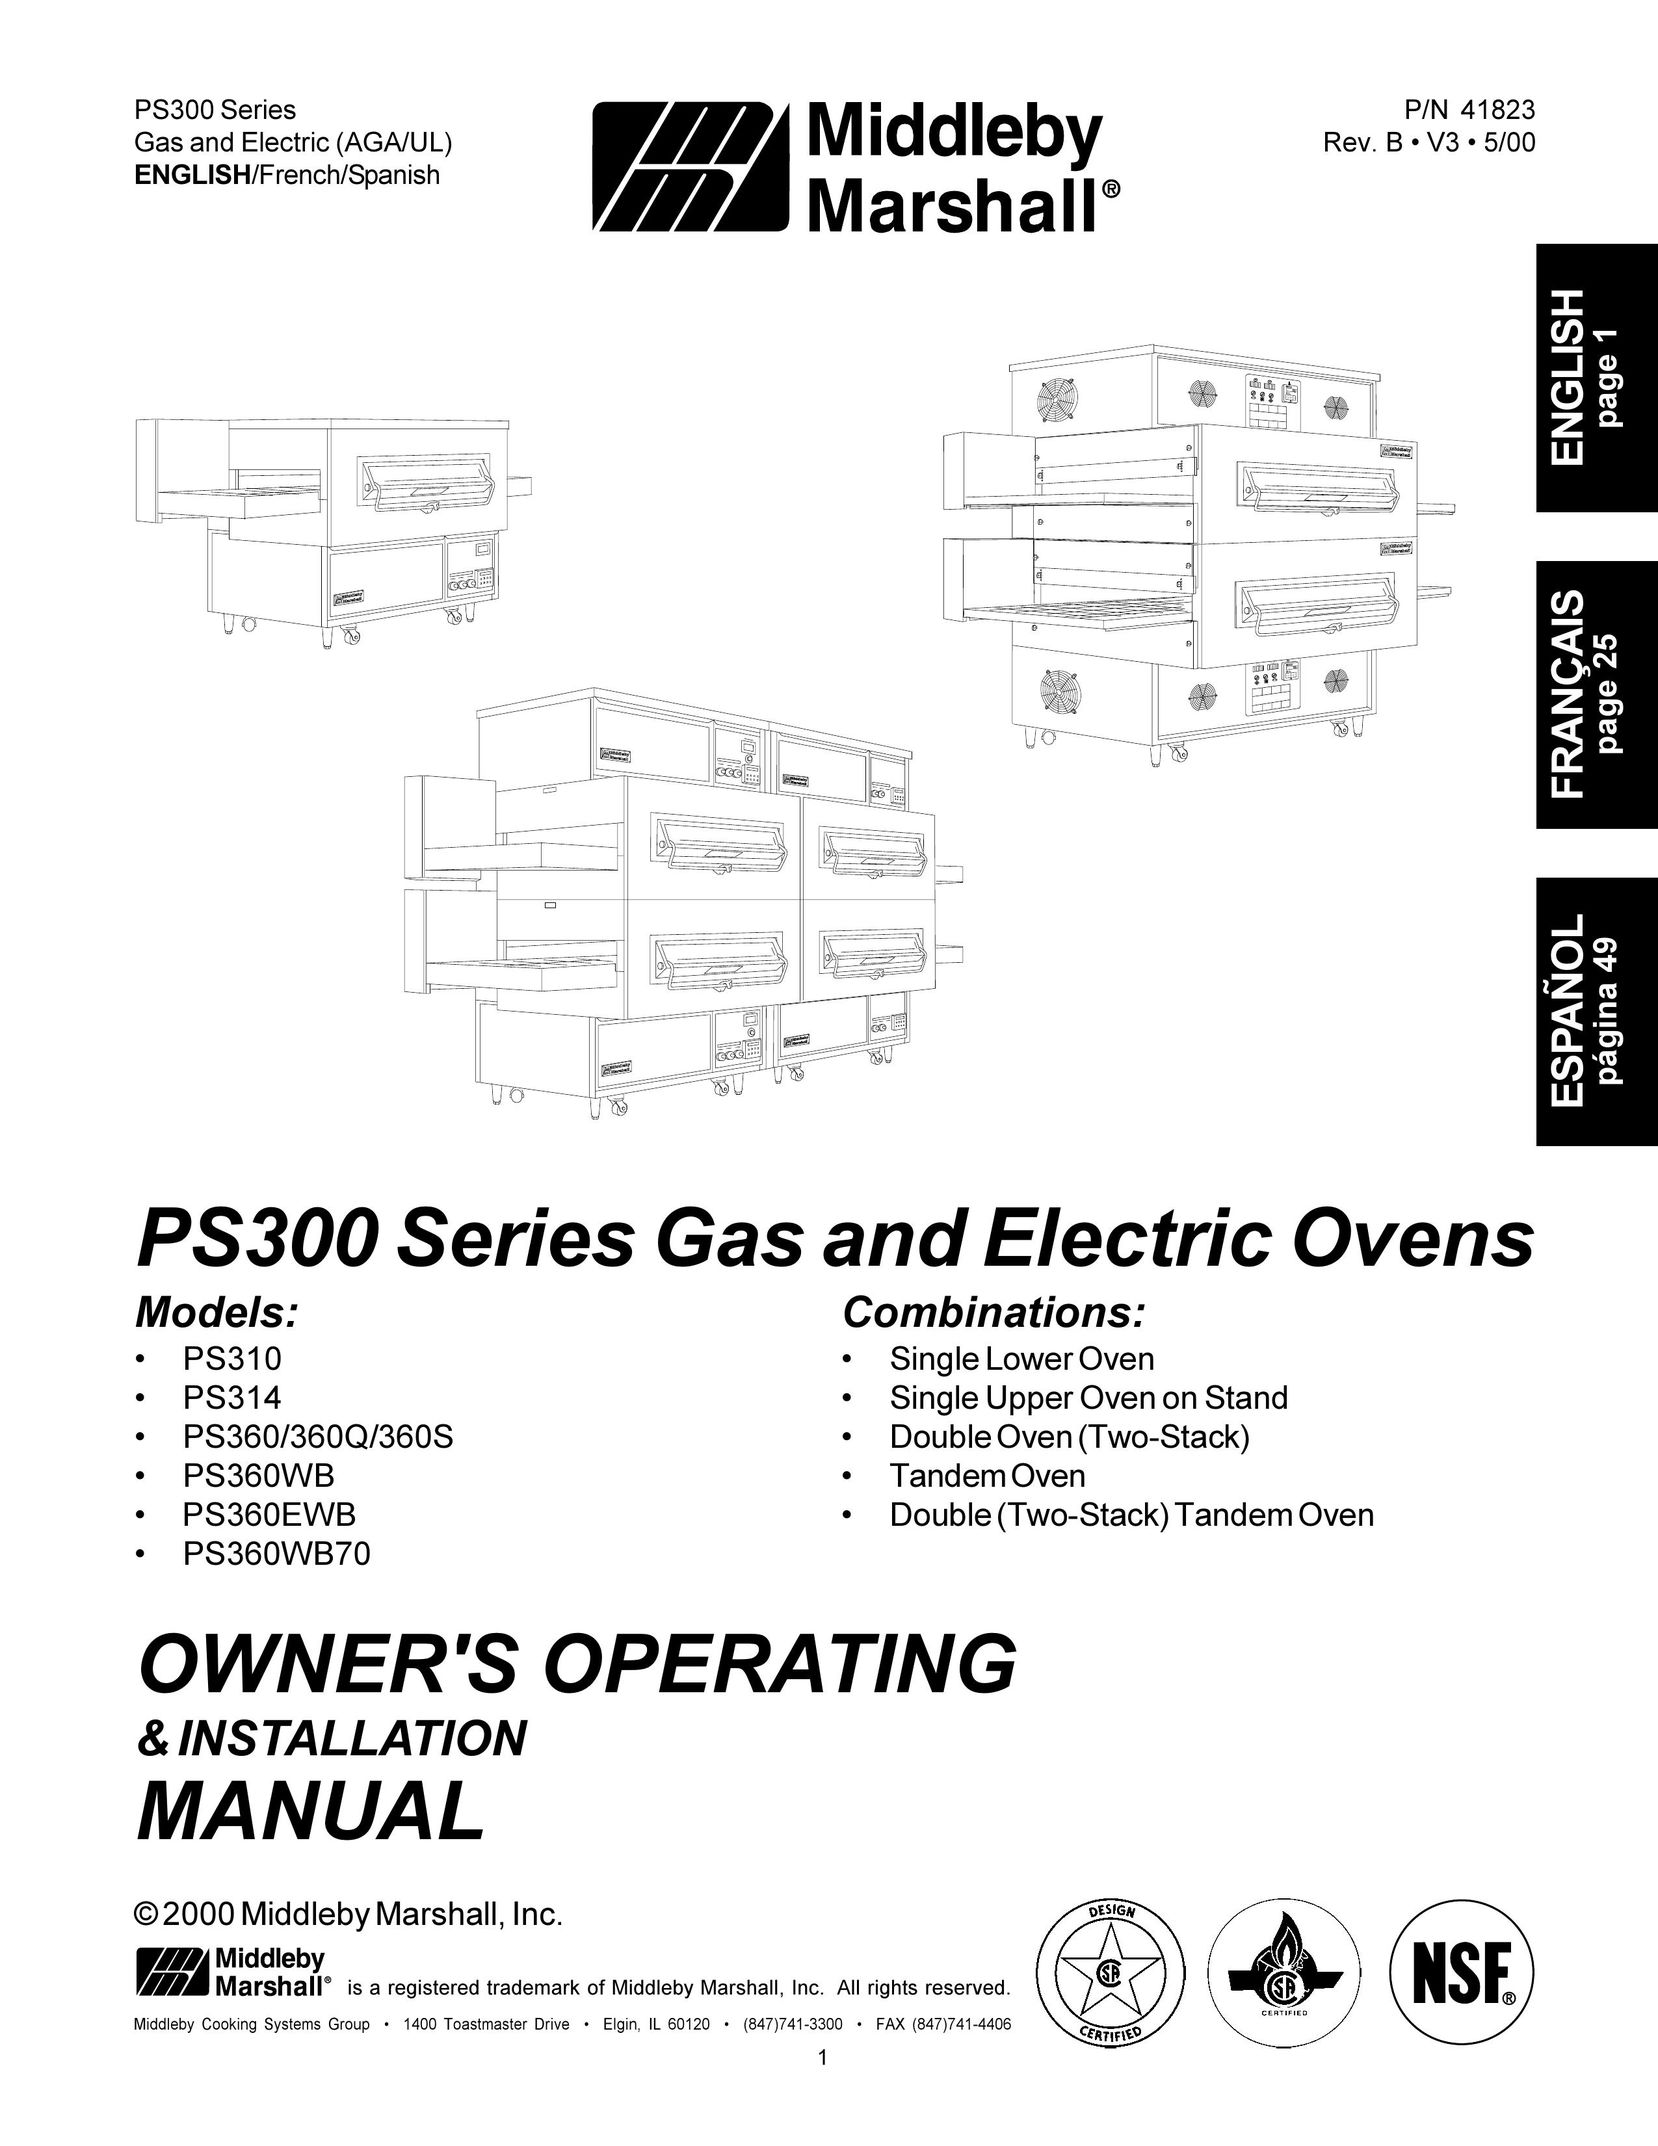 Middleby Marshall PS360Q Oven User Manual